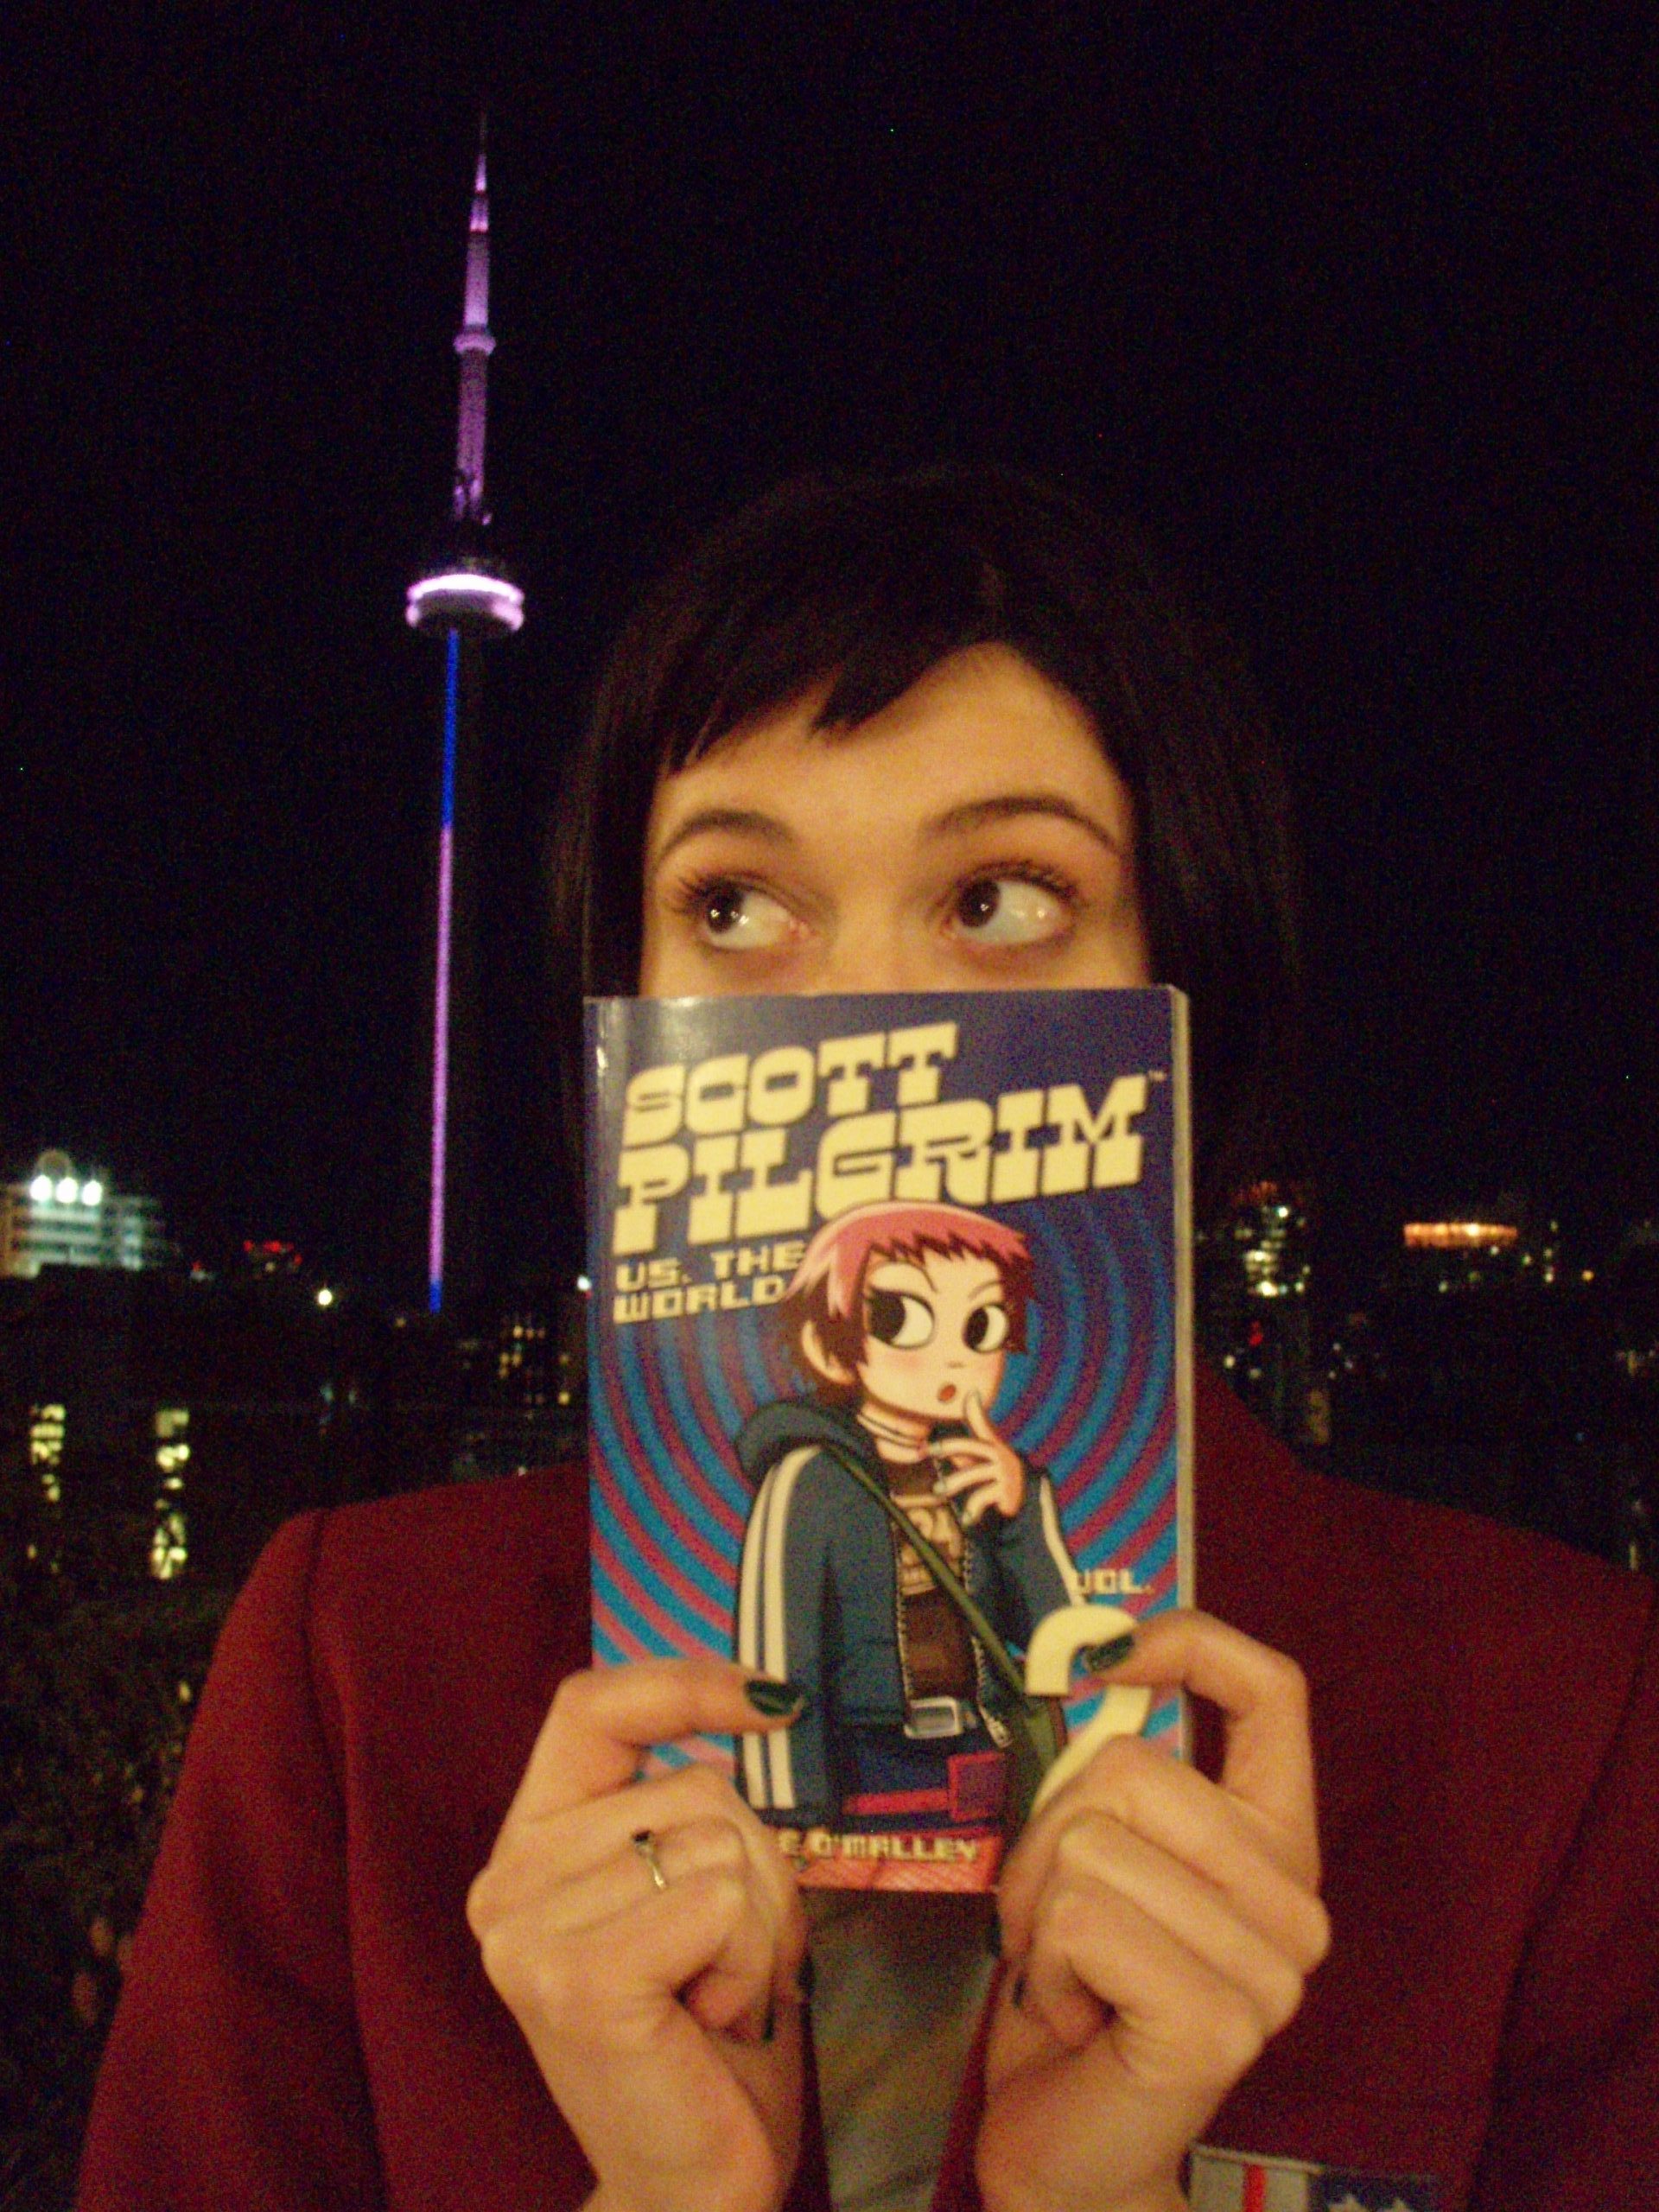 Mary Elizabeth Winstead in Toronto holding a book in front of half of her face. The book is Scott Pilgrim Vol 2 and has an illustration of Ramona Flowers on the cover.